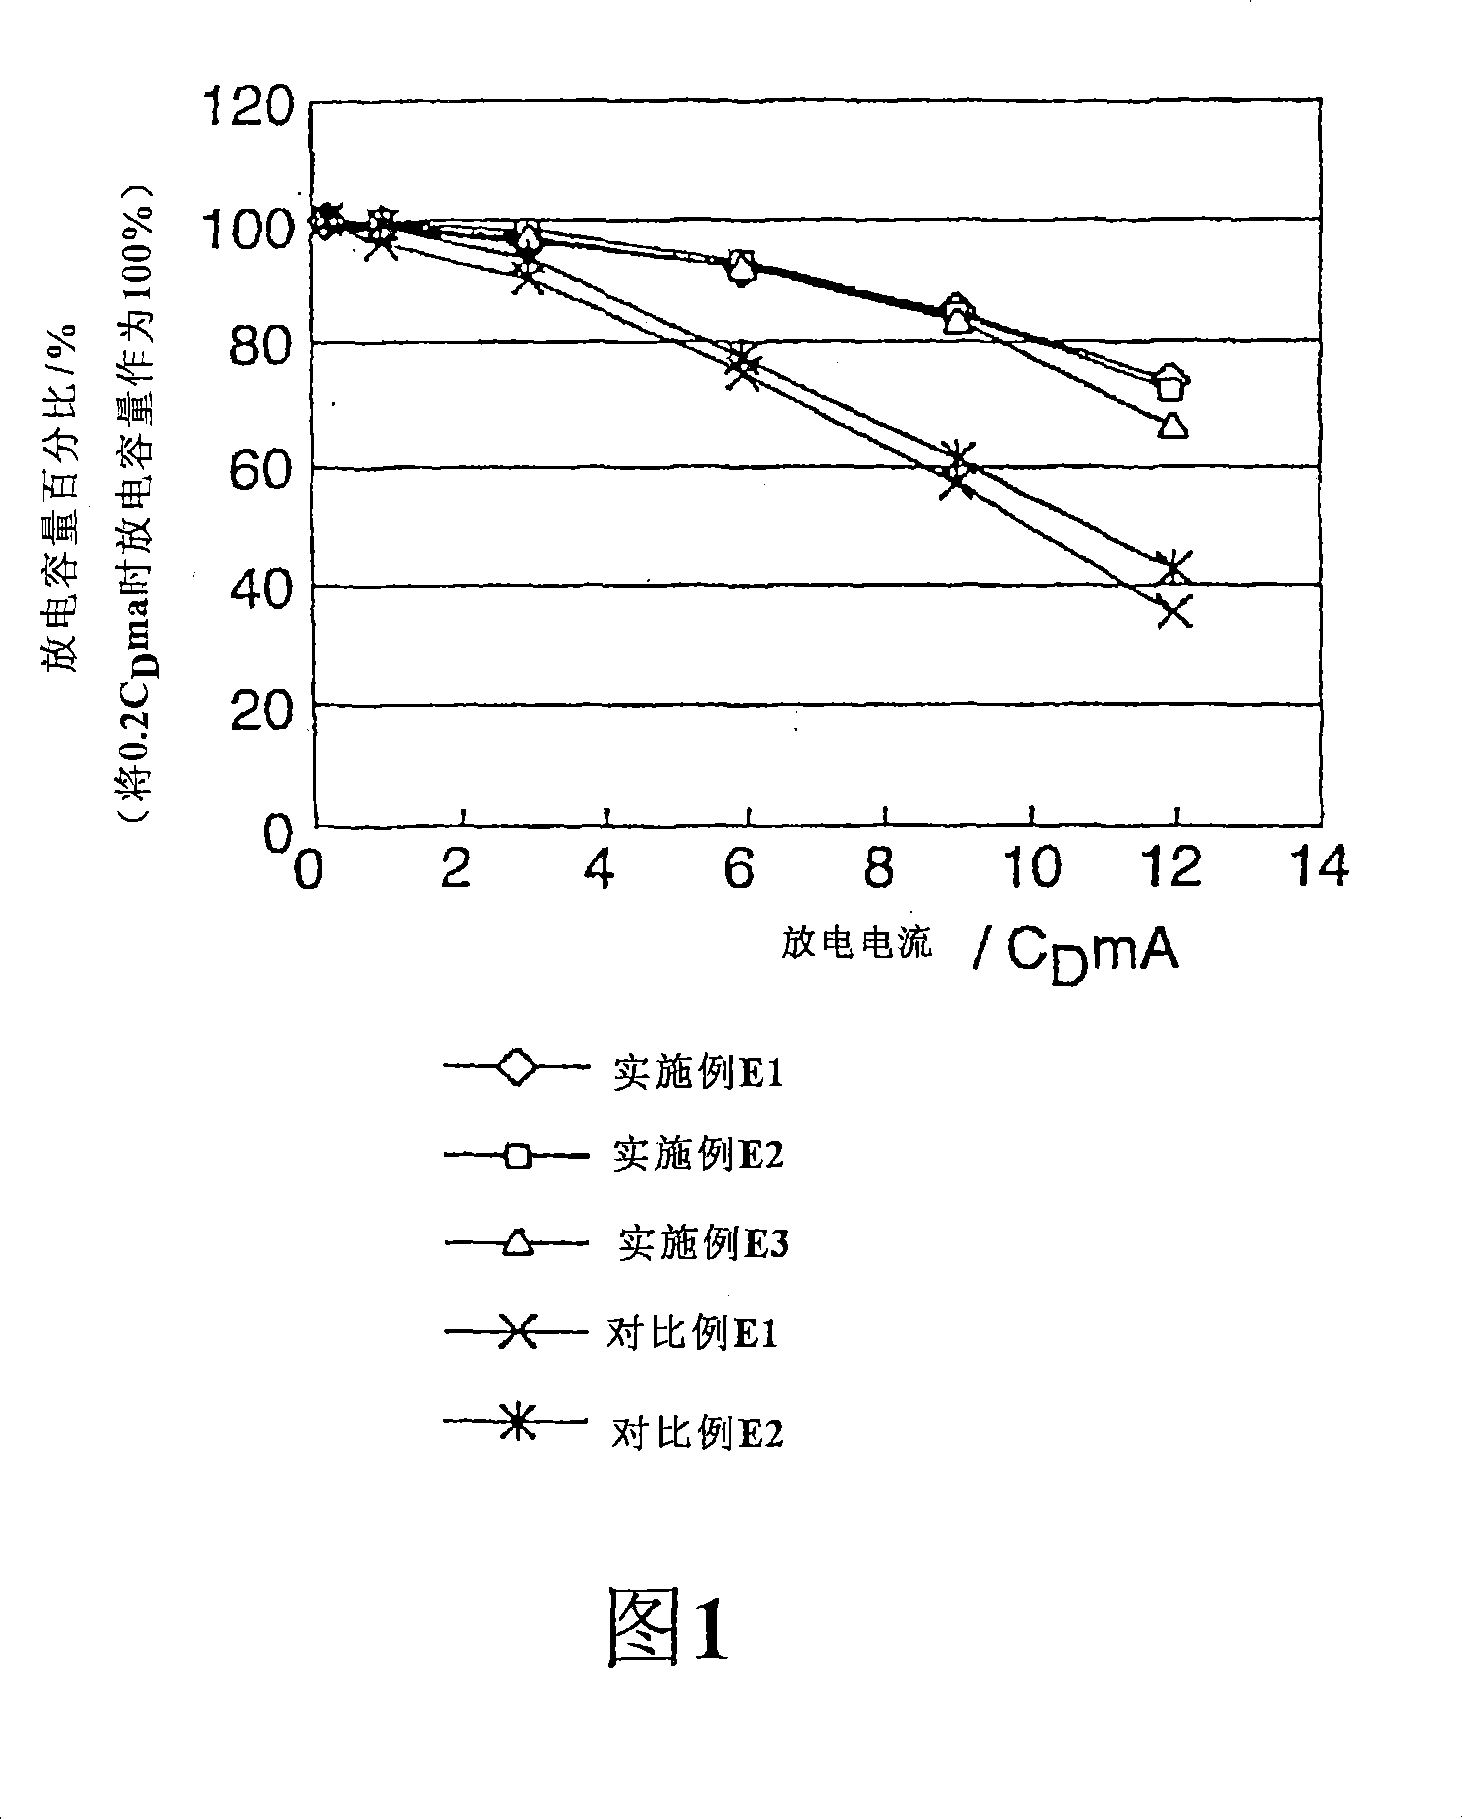 Nonaqueous electrolytic solution for electrochemical energy devices